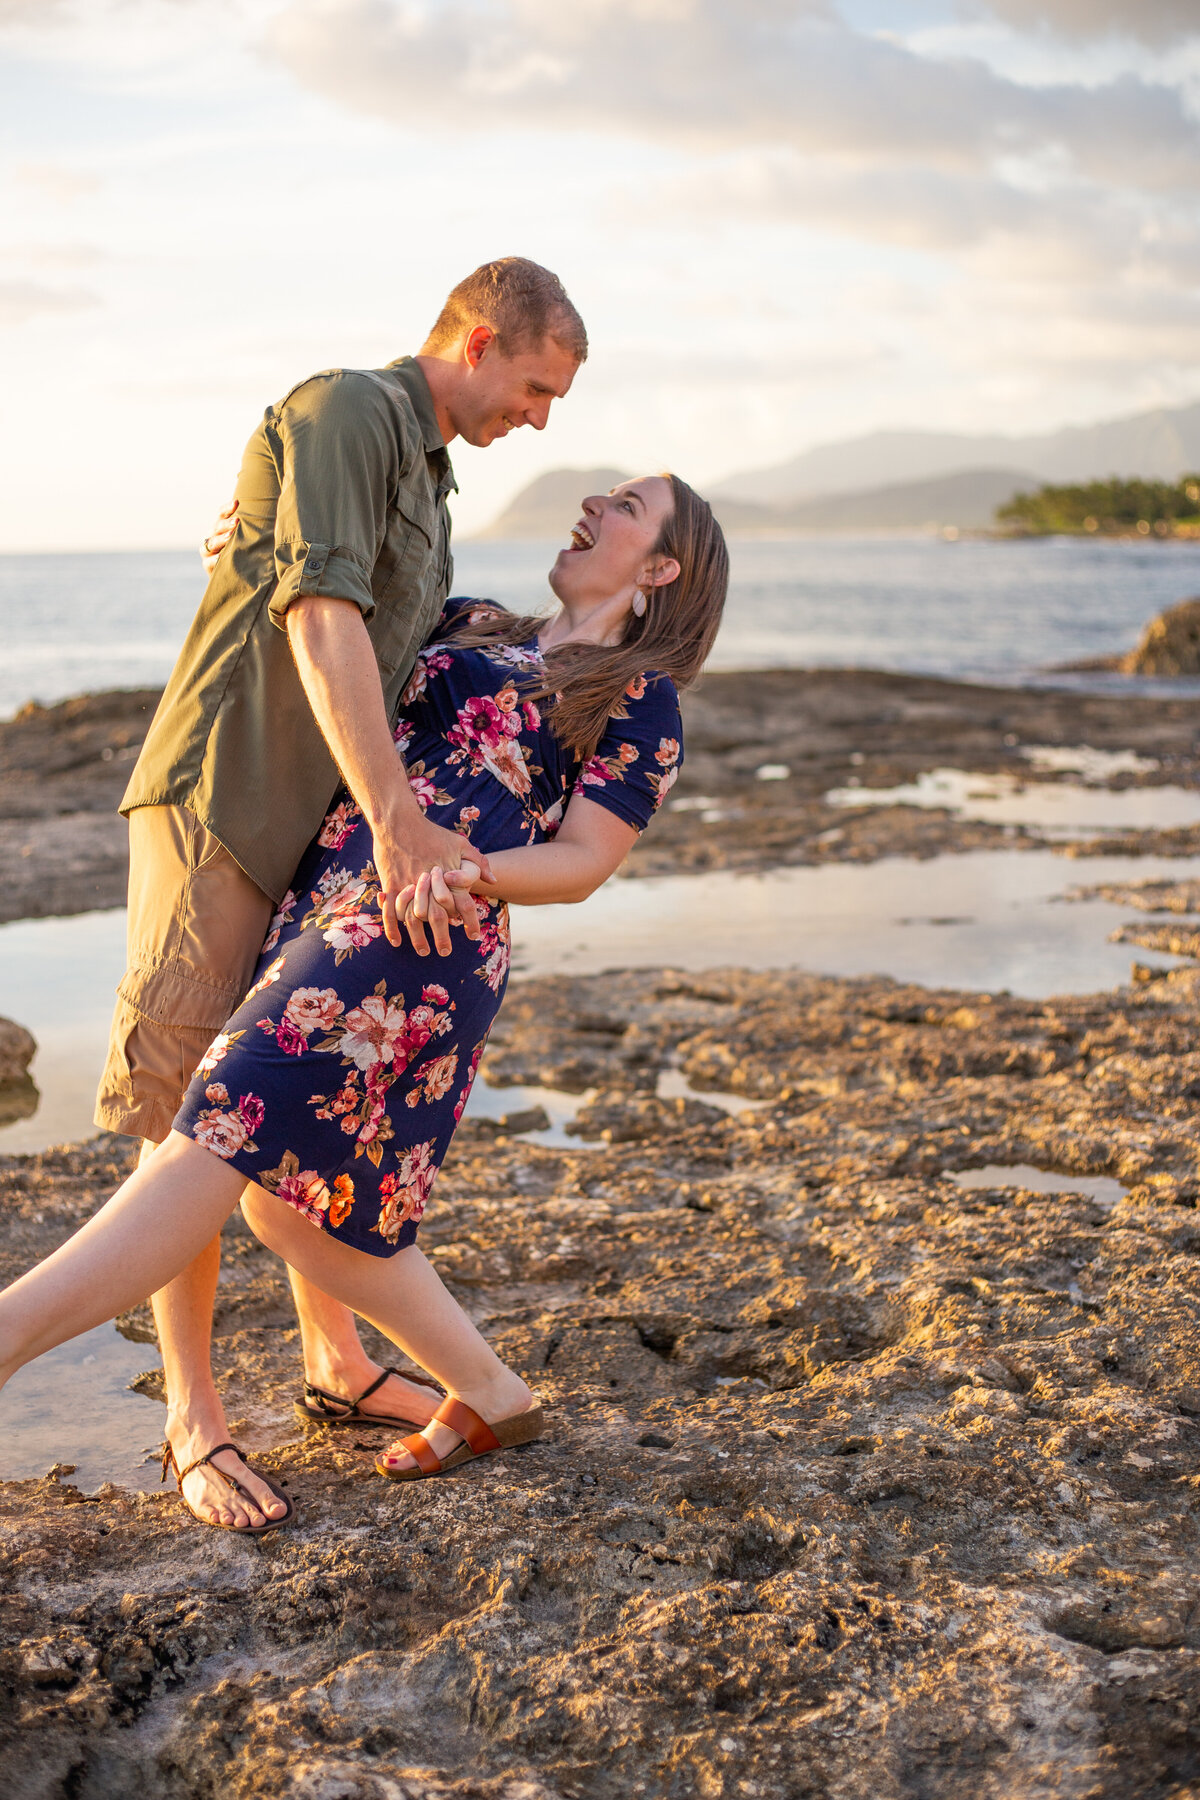 Man dipping woman in a dance move on a rocky beach. Seattle Couple Photographer.